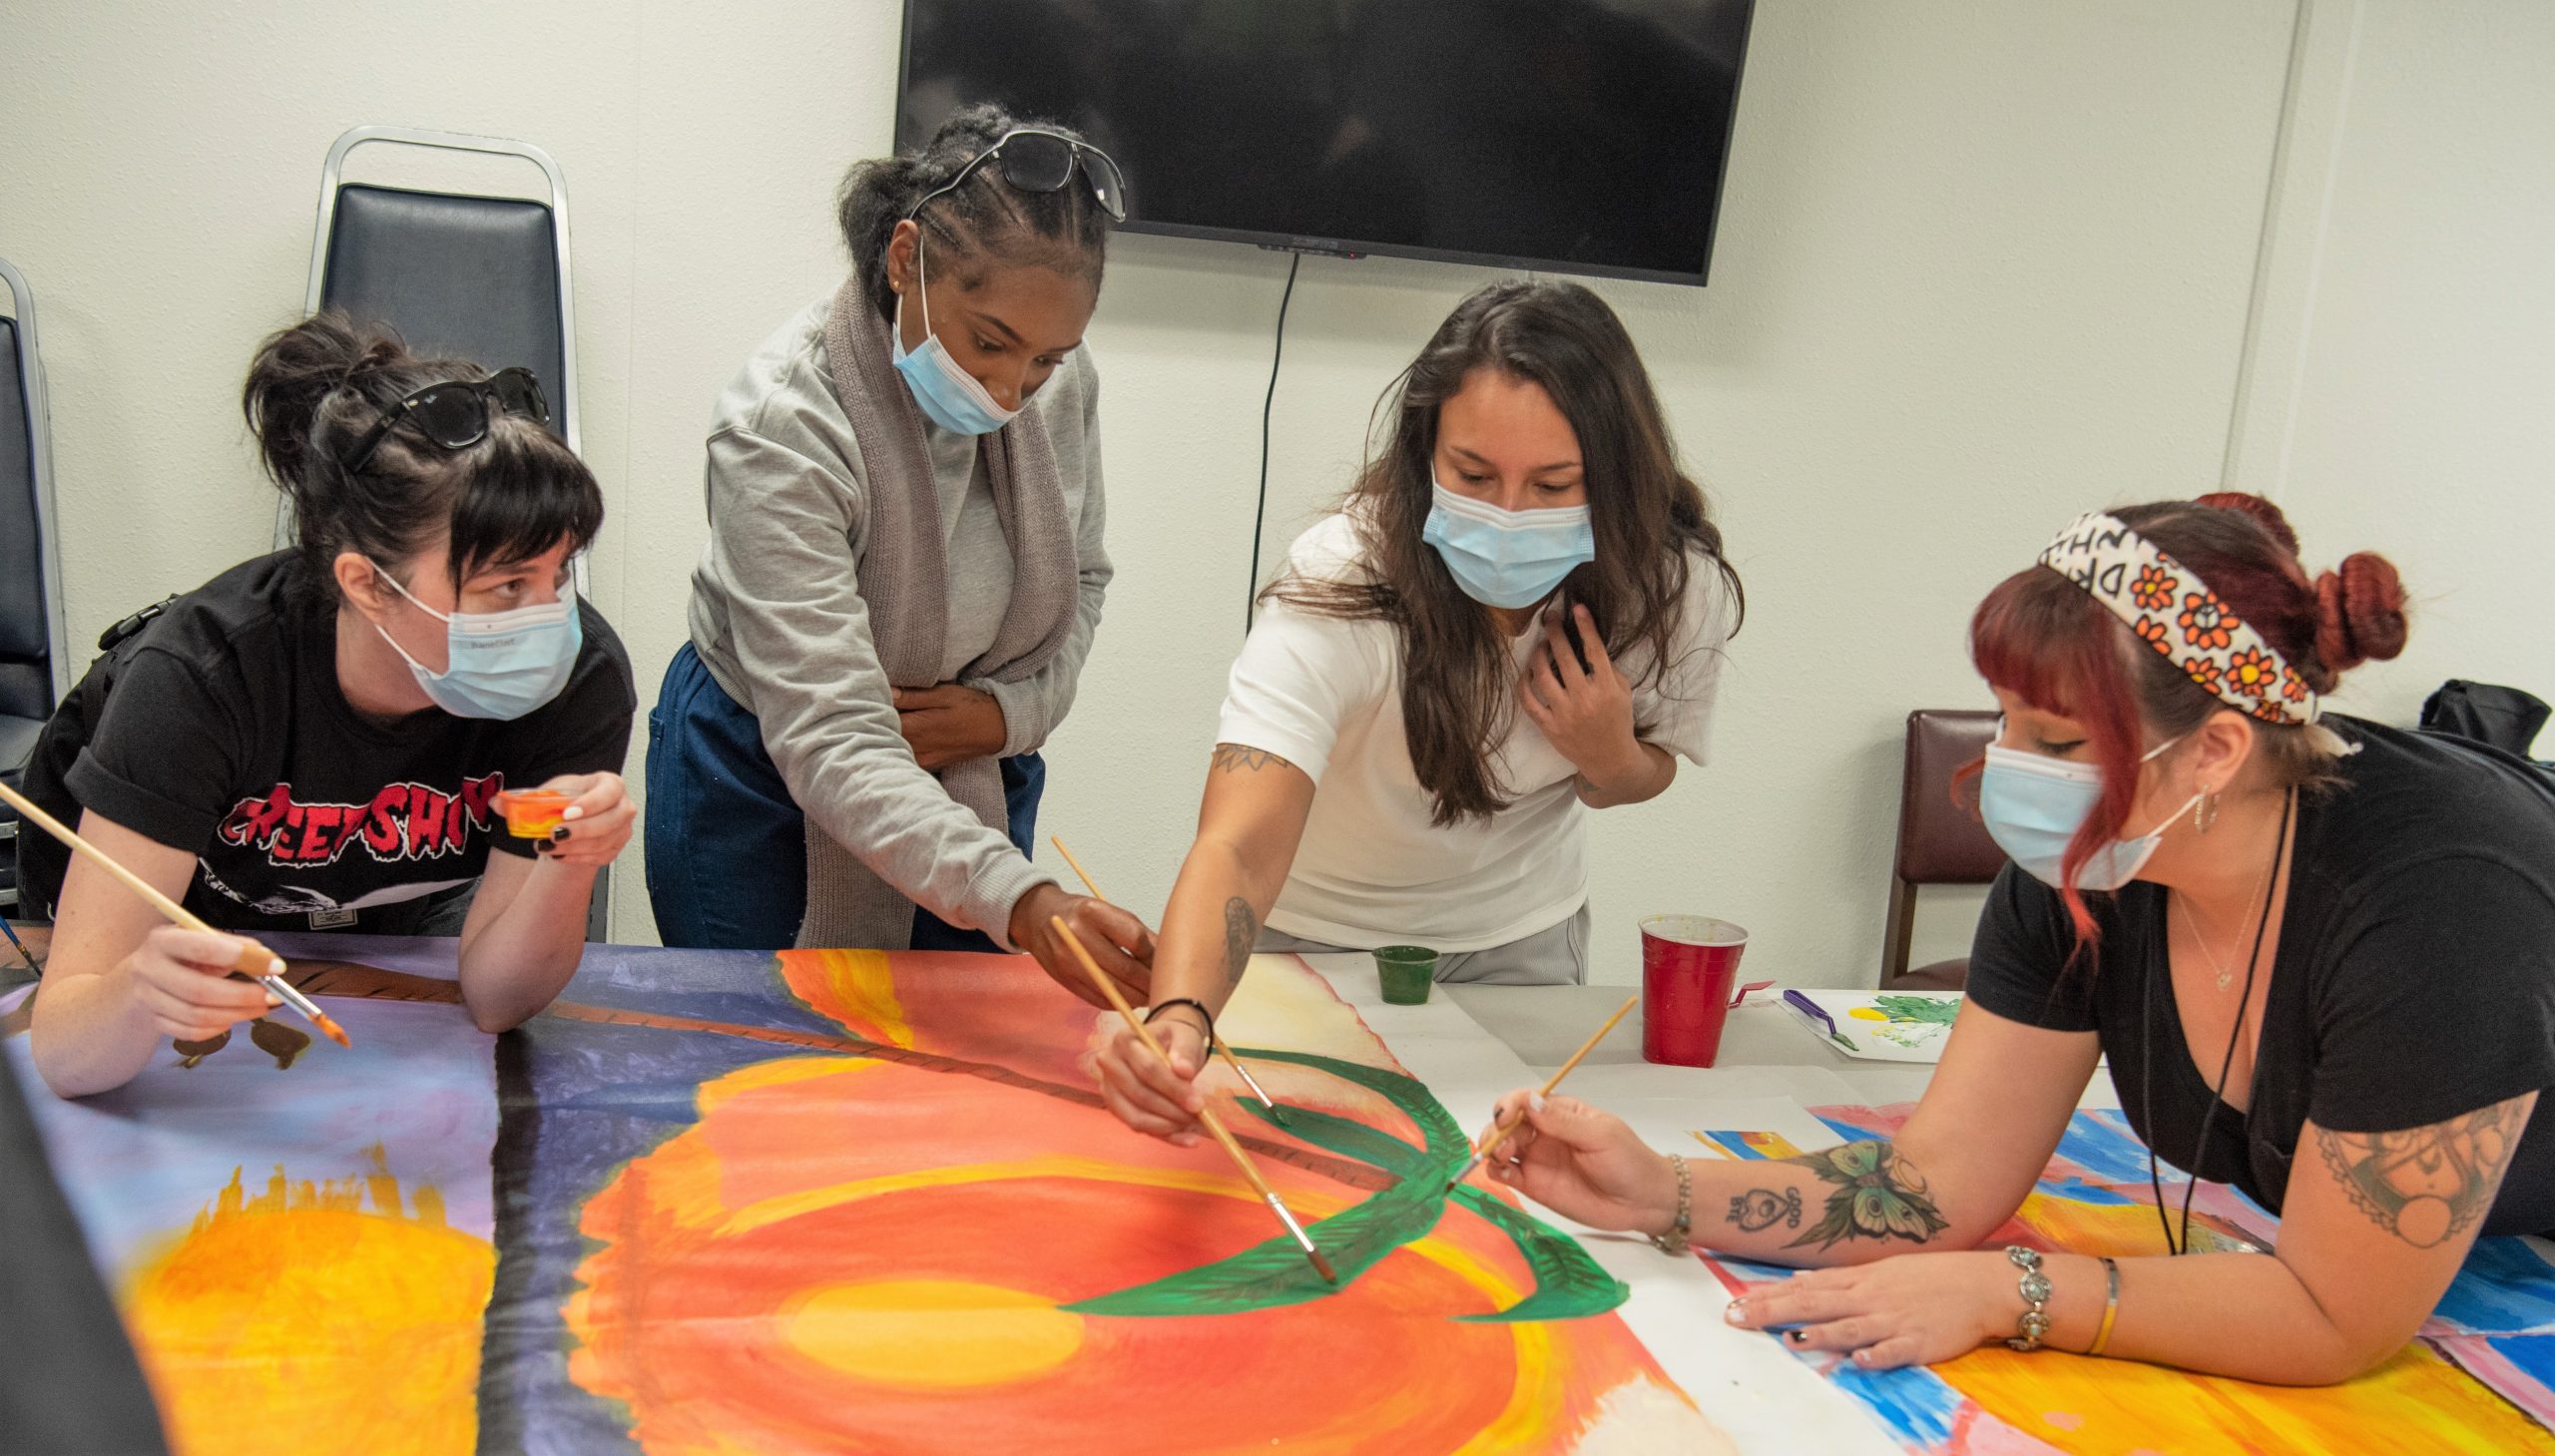 Two art teachers and two incarcerated women at a prison working on a painting.